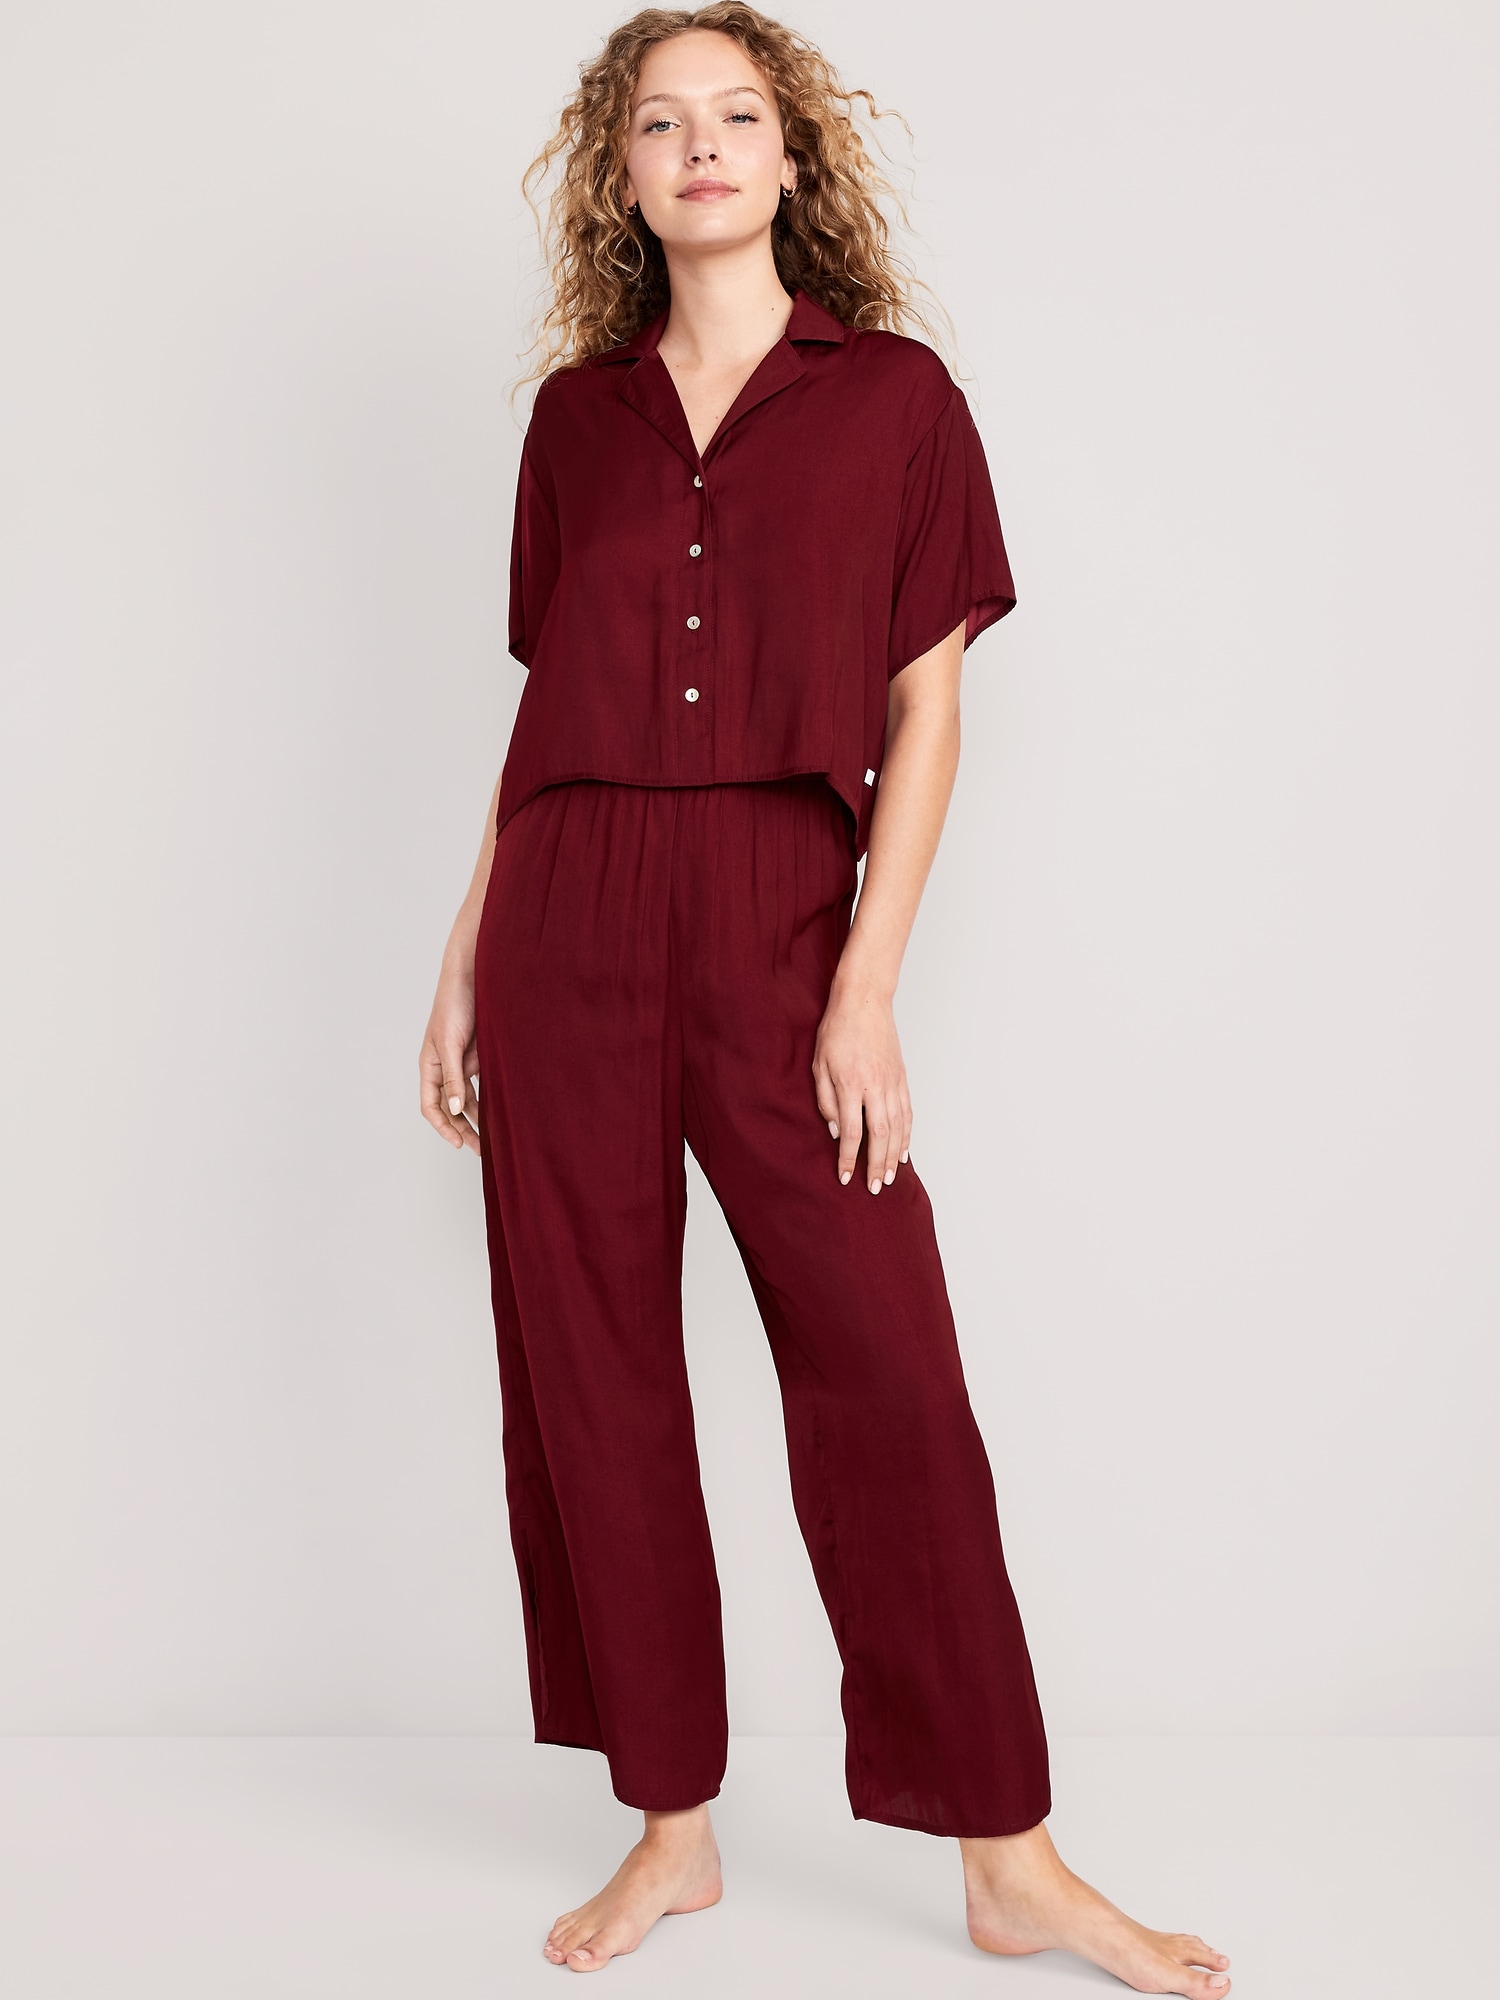 Just Be. Apparel Lightweight Pajama Sets for Women